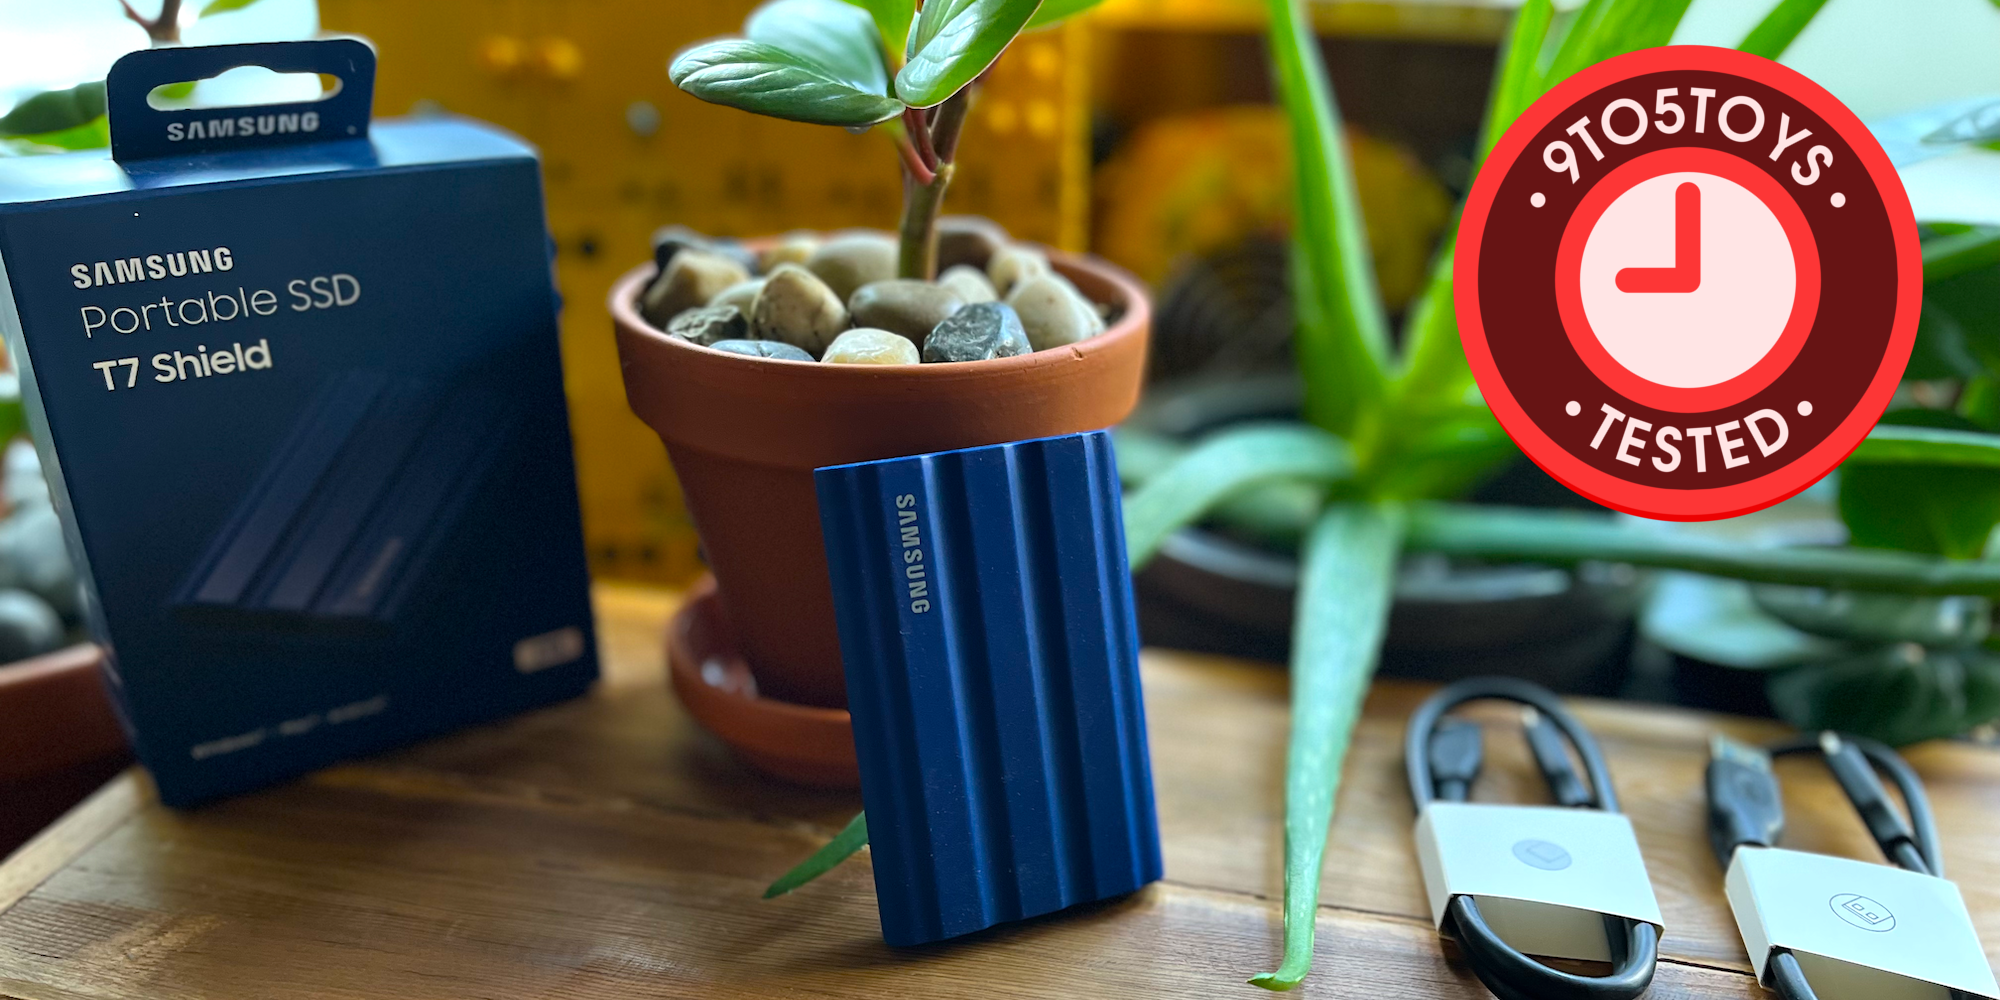 Review: Samsung's new portable SSD launches today 9to5Toys